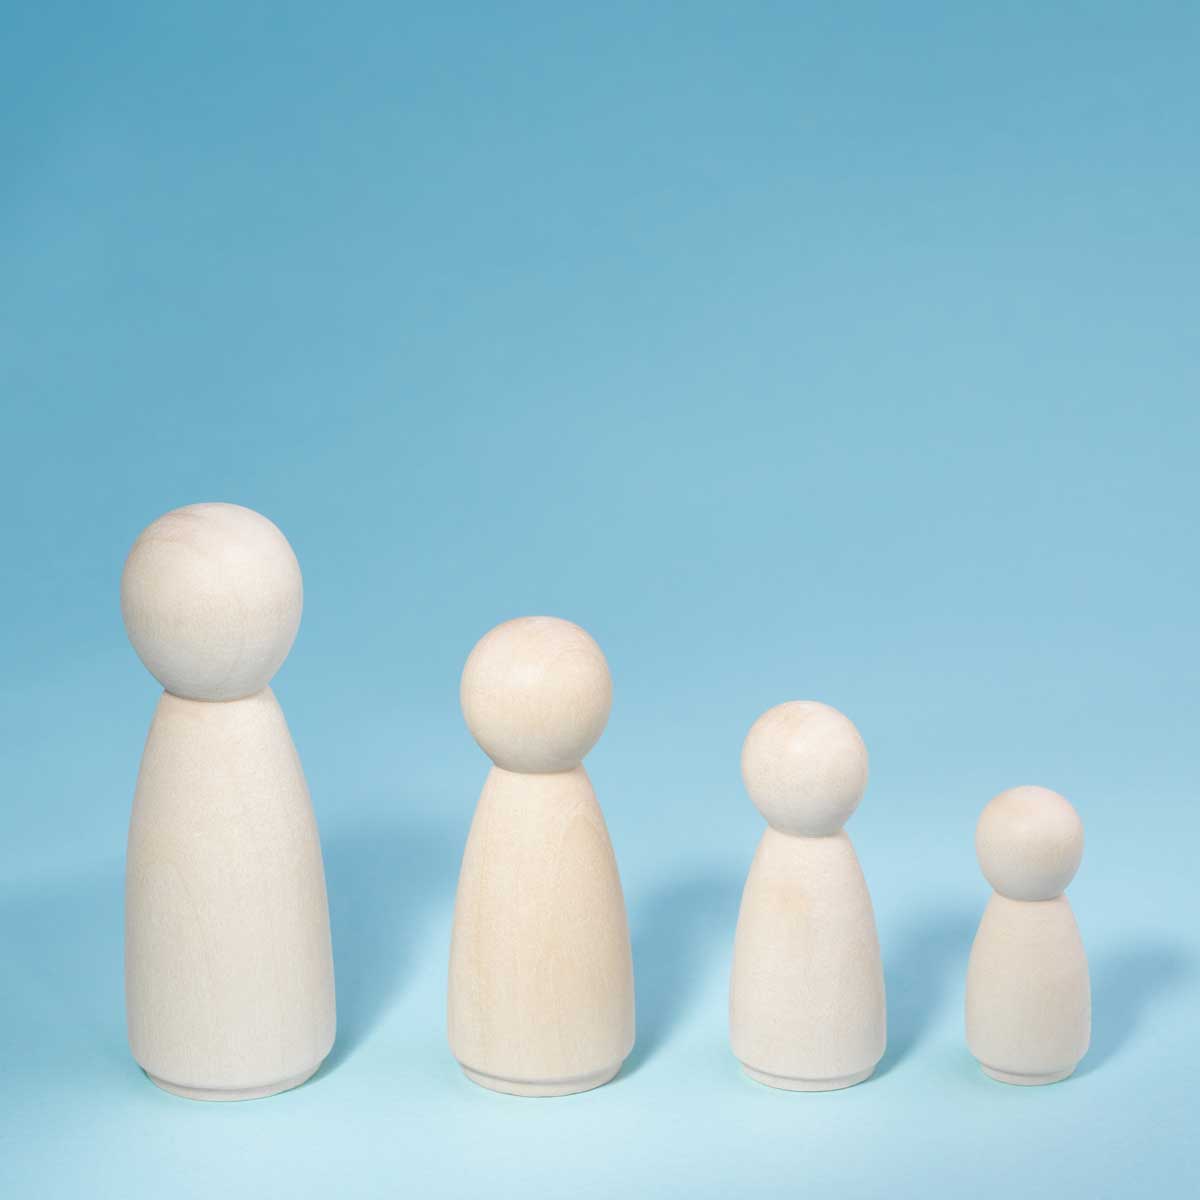 Wooden figurines standing in a row from high to low. Concept person growth on blue background. Management strategy. Leadership concept. Teamwork idea.